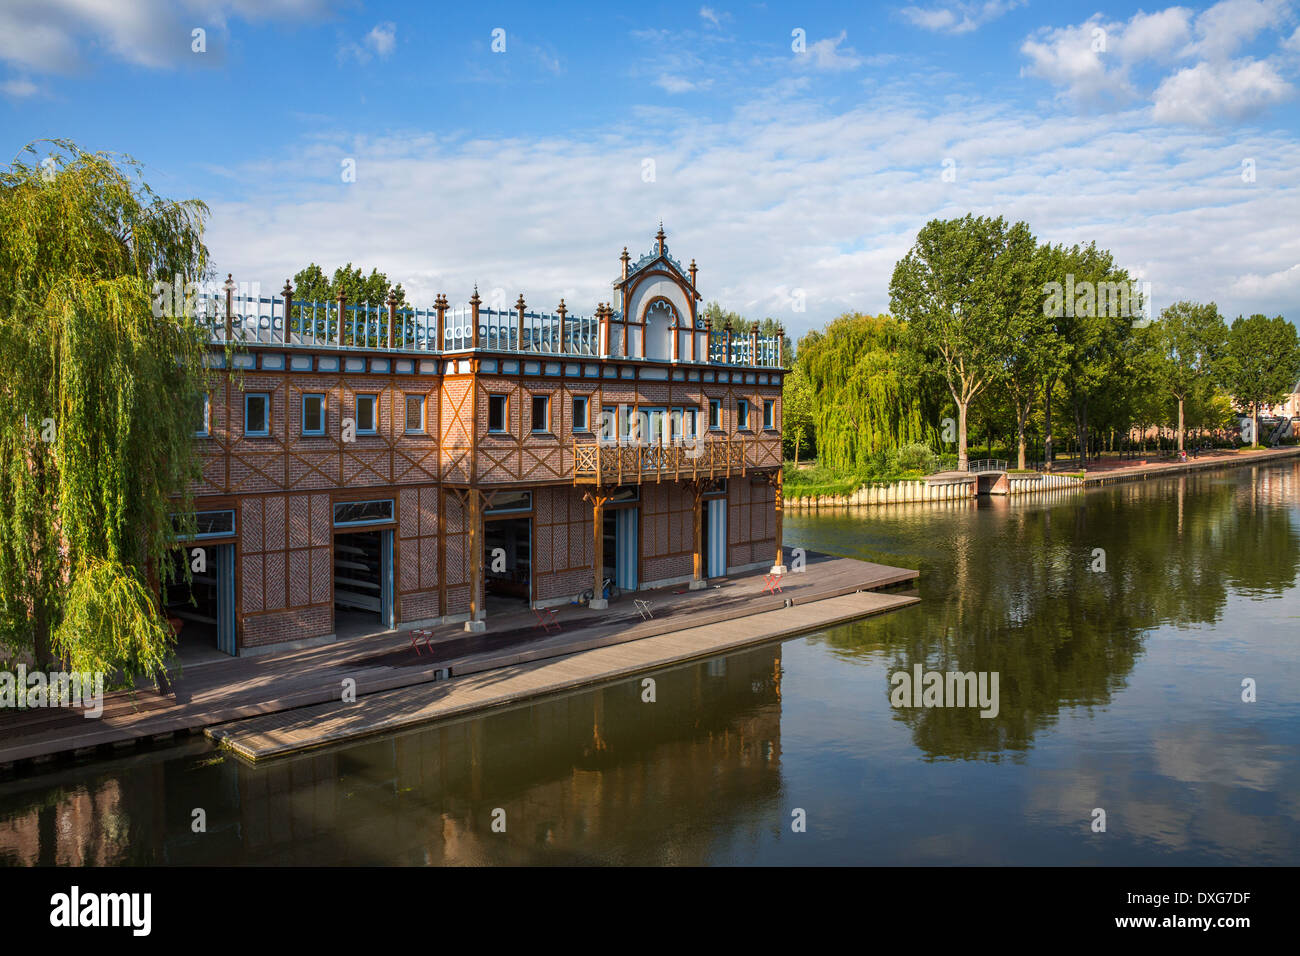 The old boathouse on the waterfront of the River Somme in the town of Amiens in the Picardy region of northern France. Stock Photo